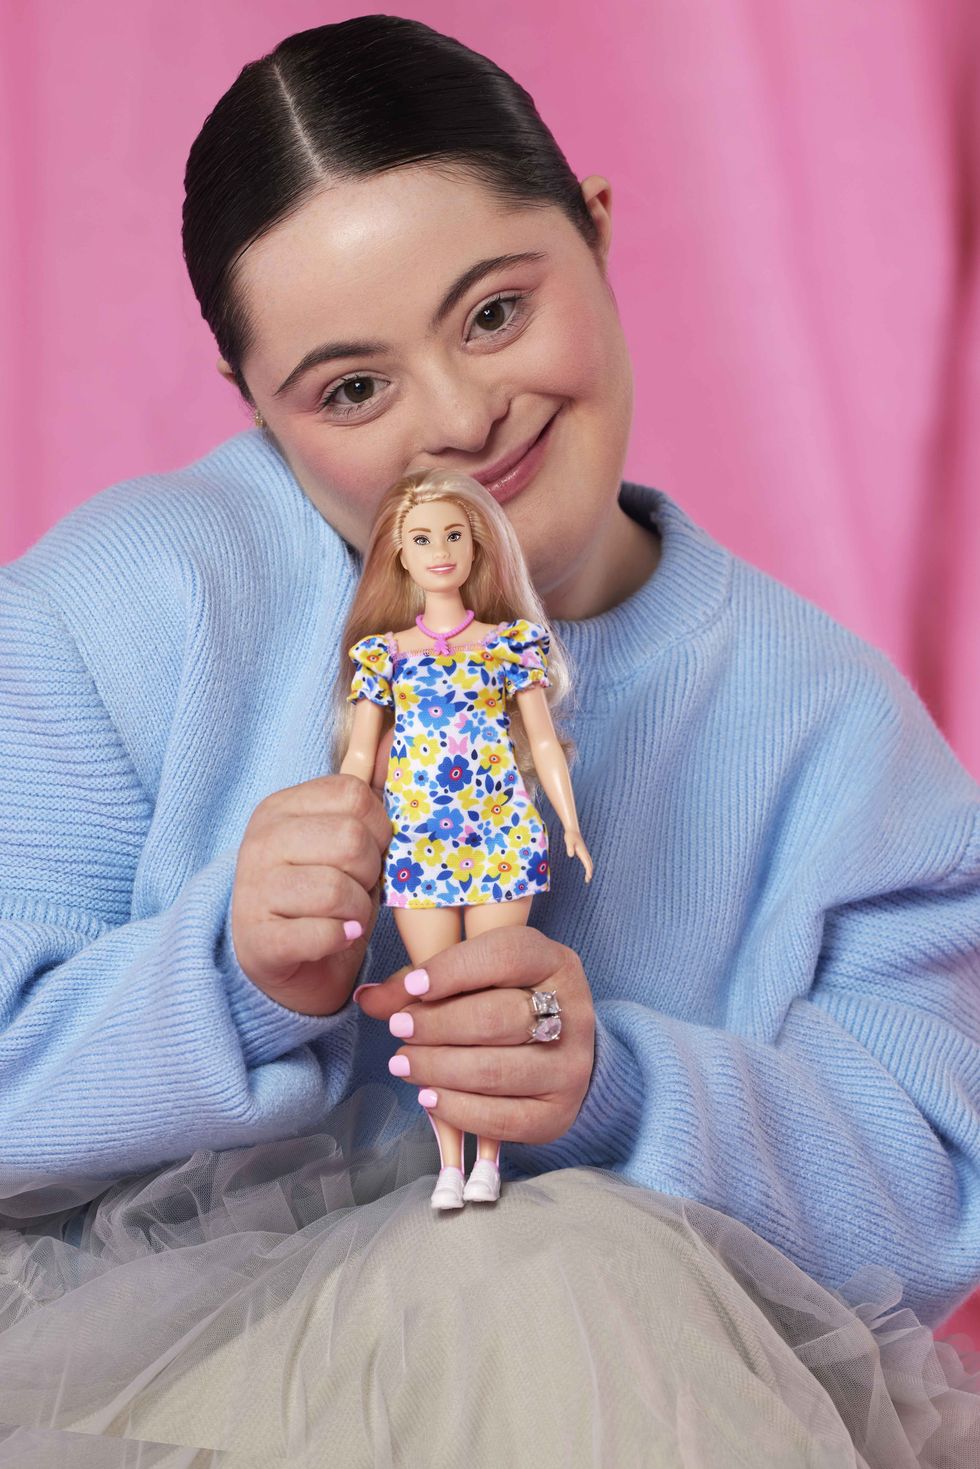 Mattel unveils new inclusive toys, including Barbie with hearing aids